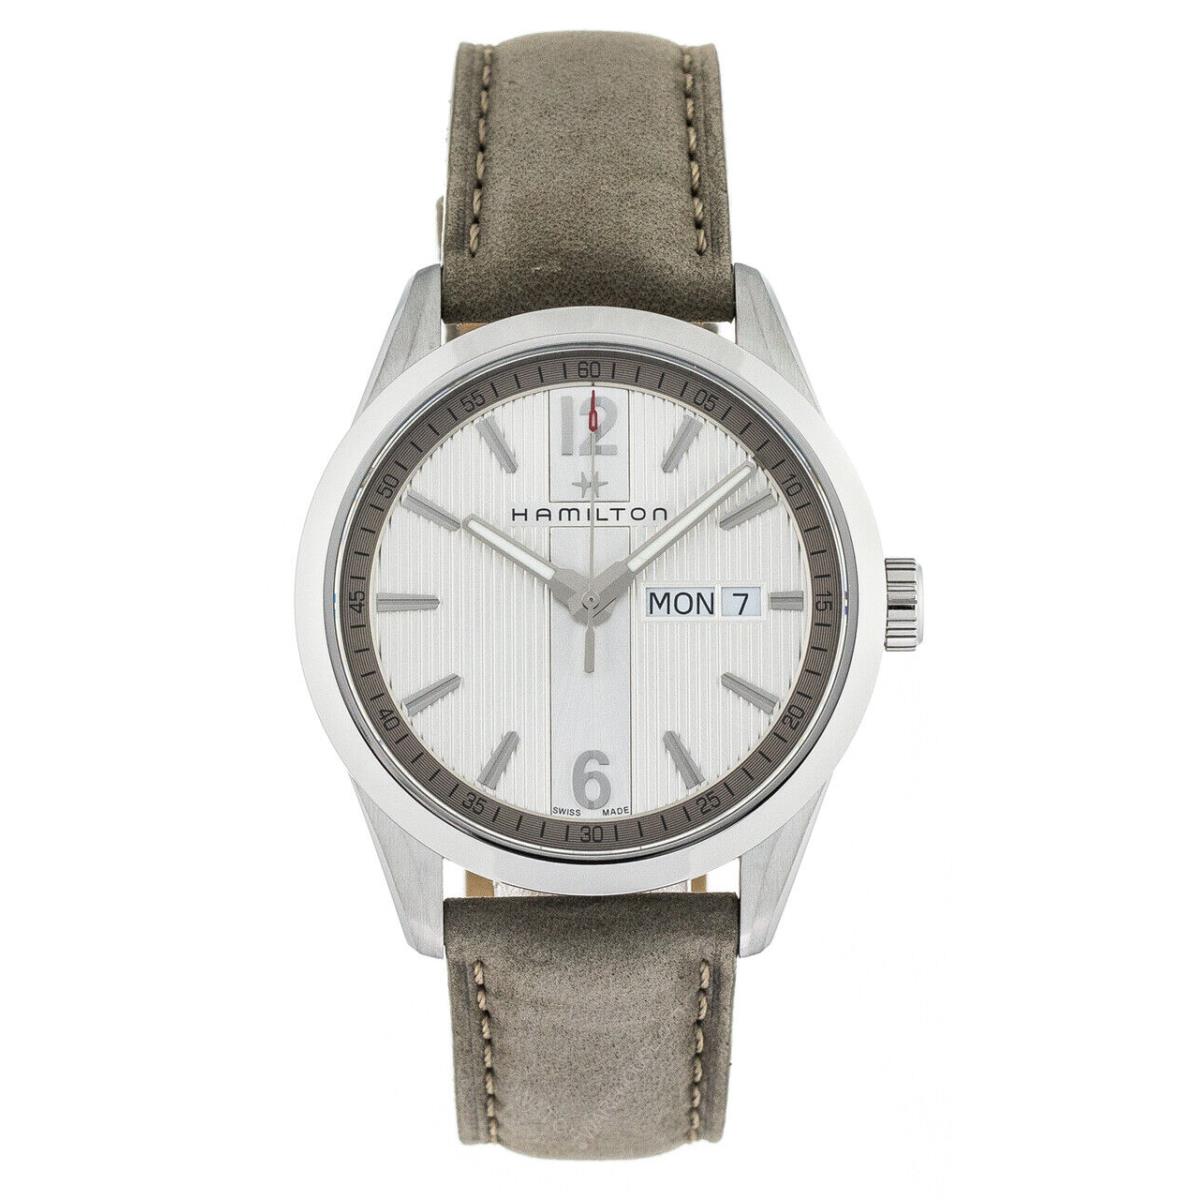 Hamilton Broadway Day Date Silver Dial Gray Leather Band Quartz Watch H43311915 - Silver Dial, Gray Band, Silver Bezel